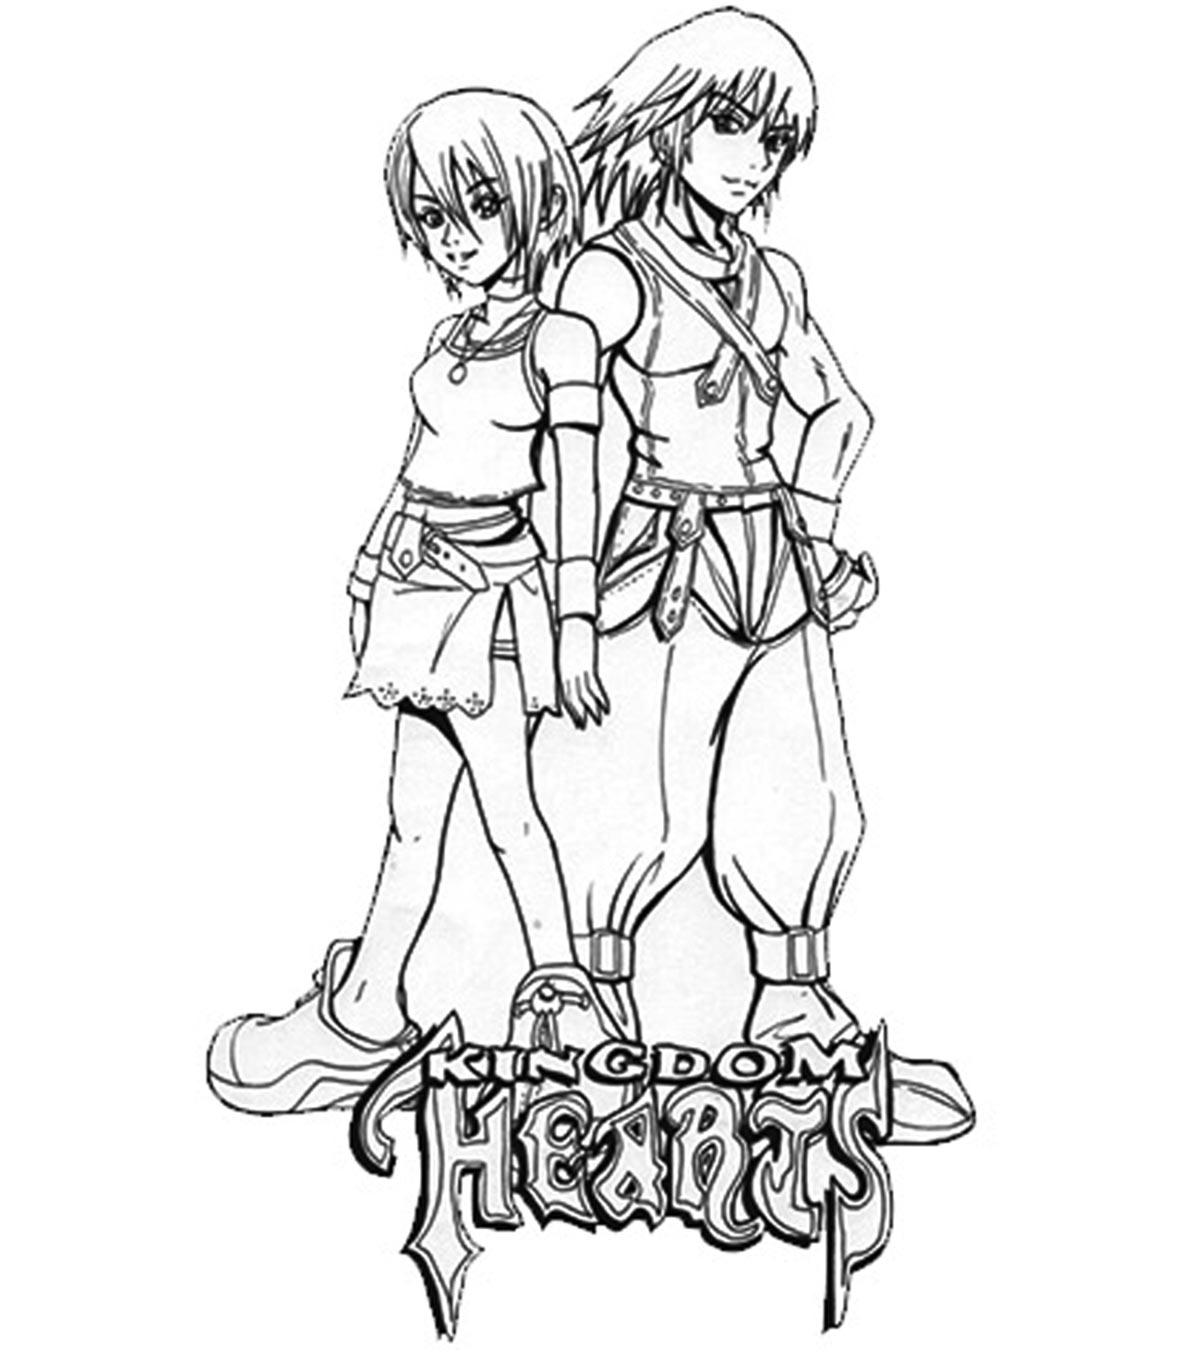 25 Interesting Kingdom Hearts Coloring Pages For Your Little Ones